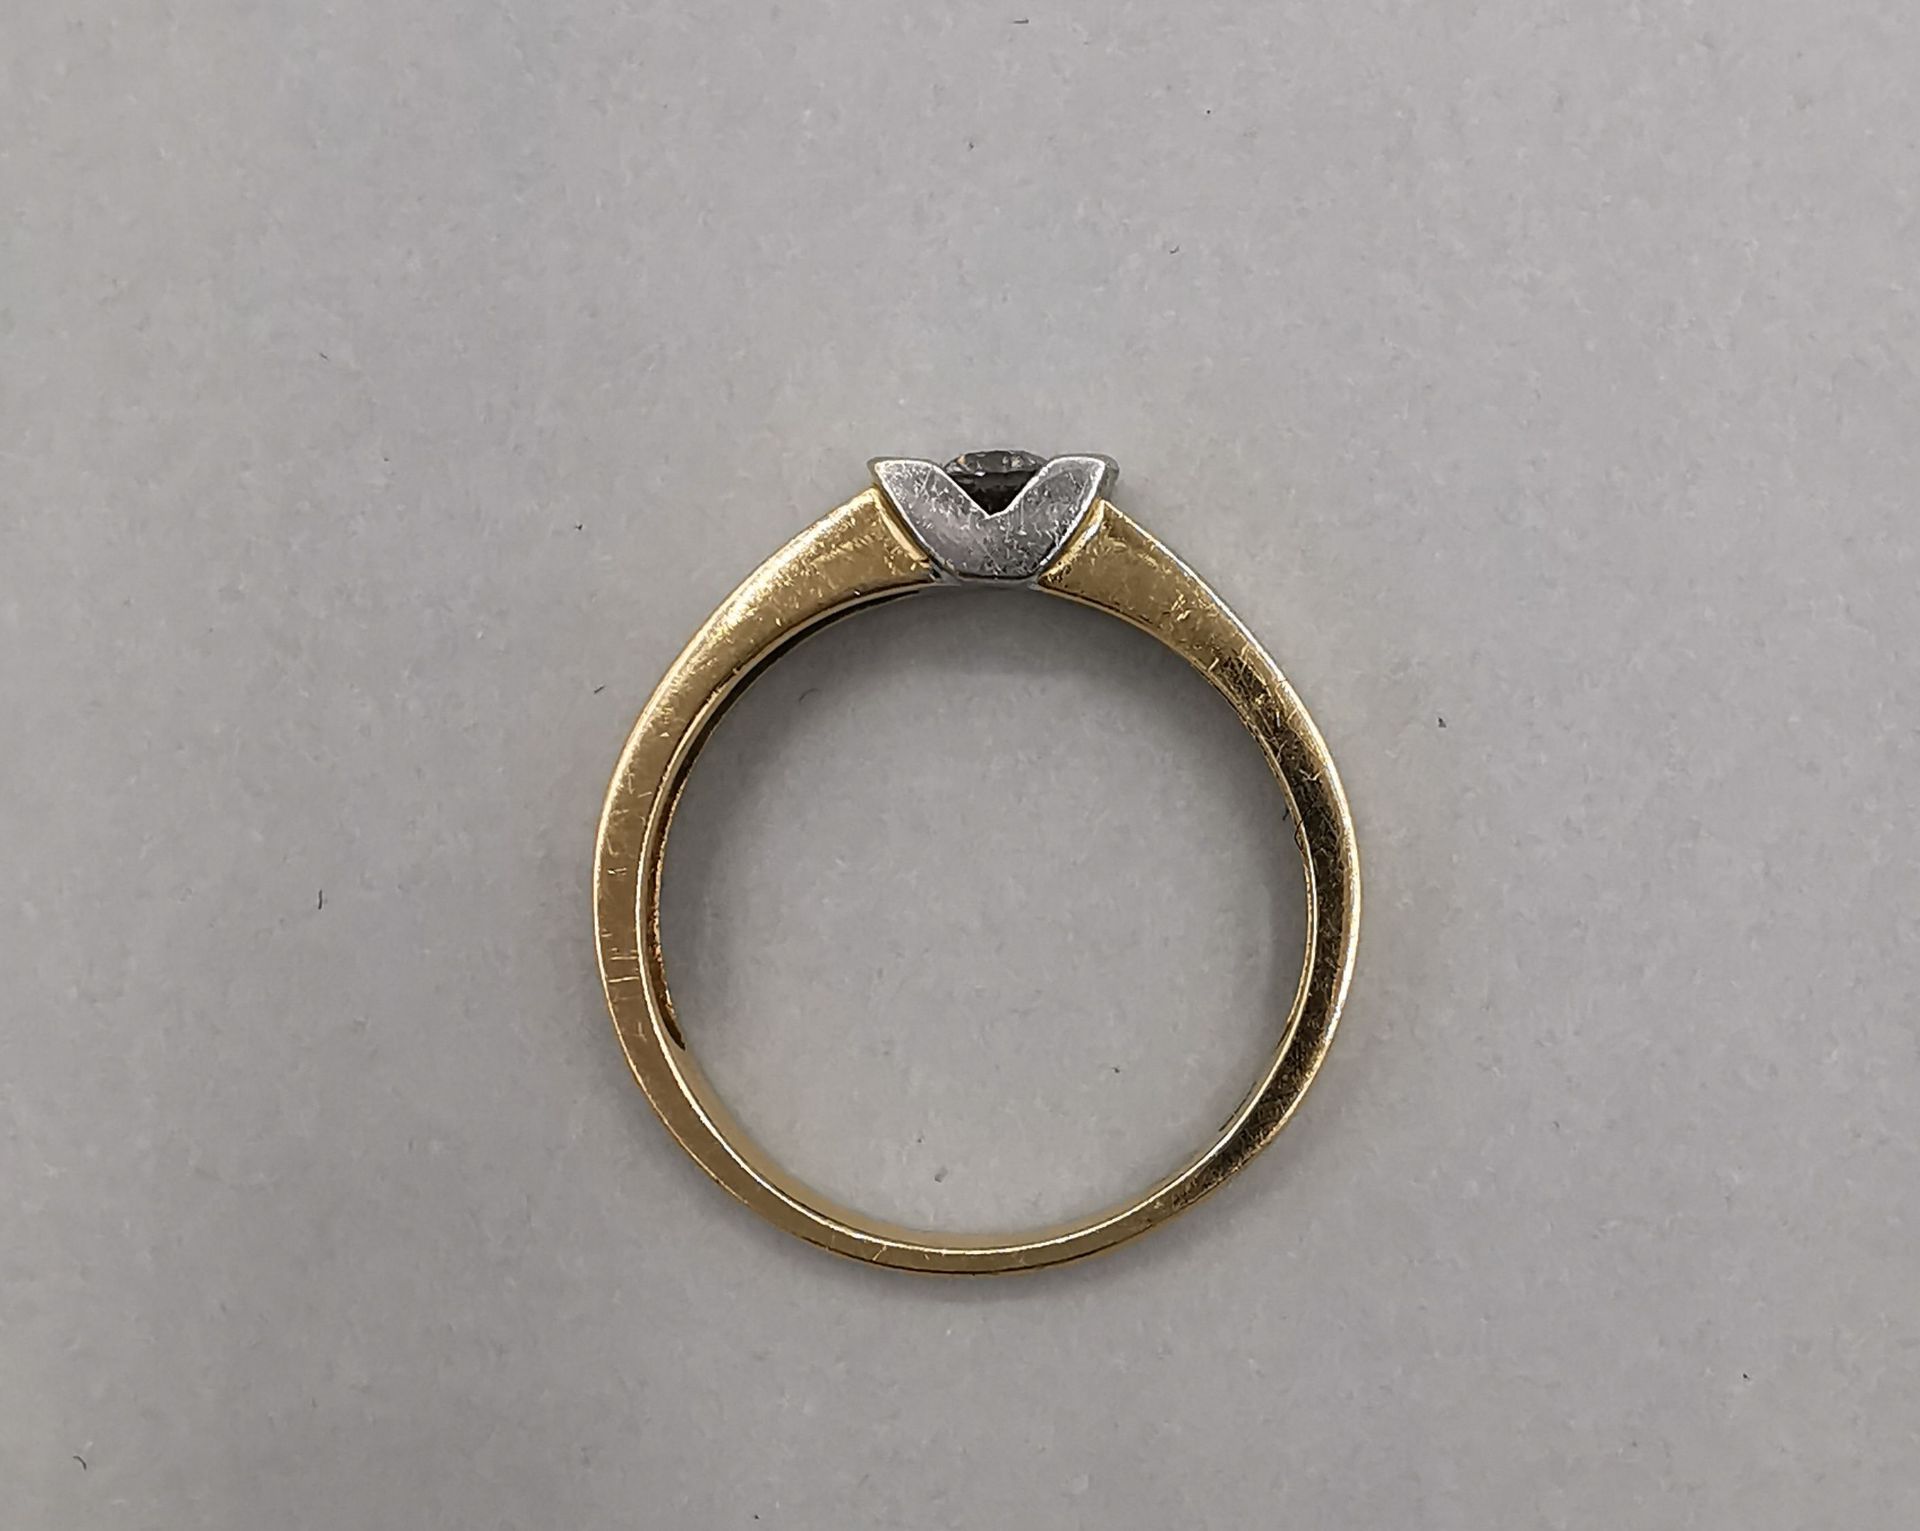 RING WITH DIAMONDS - Image 3 of 3